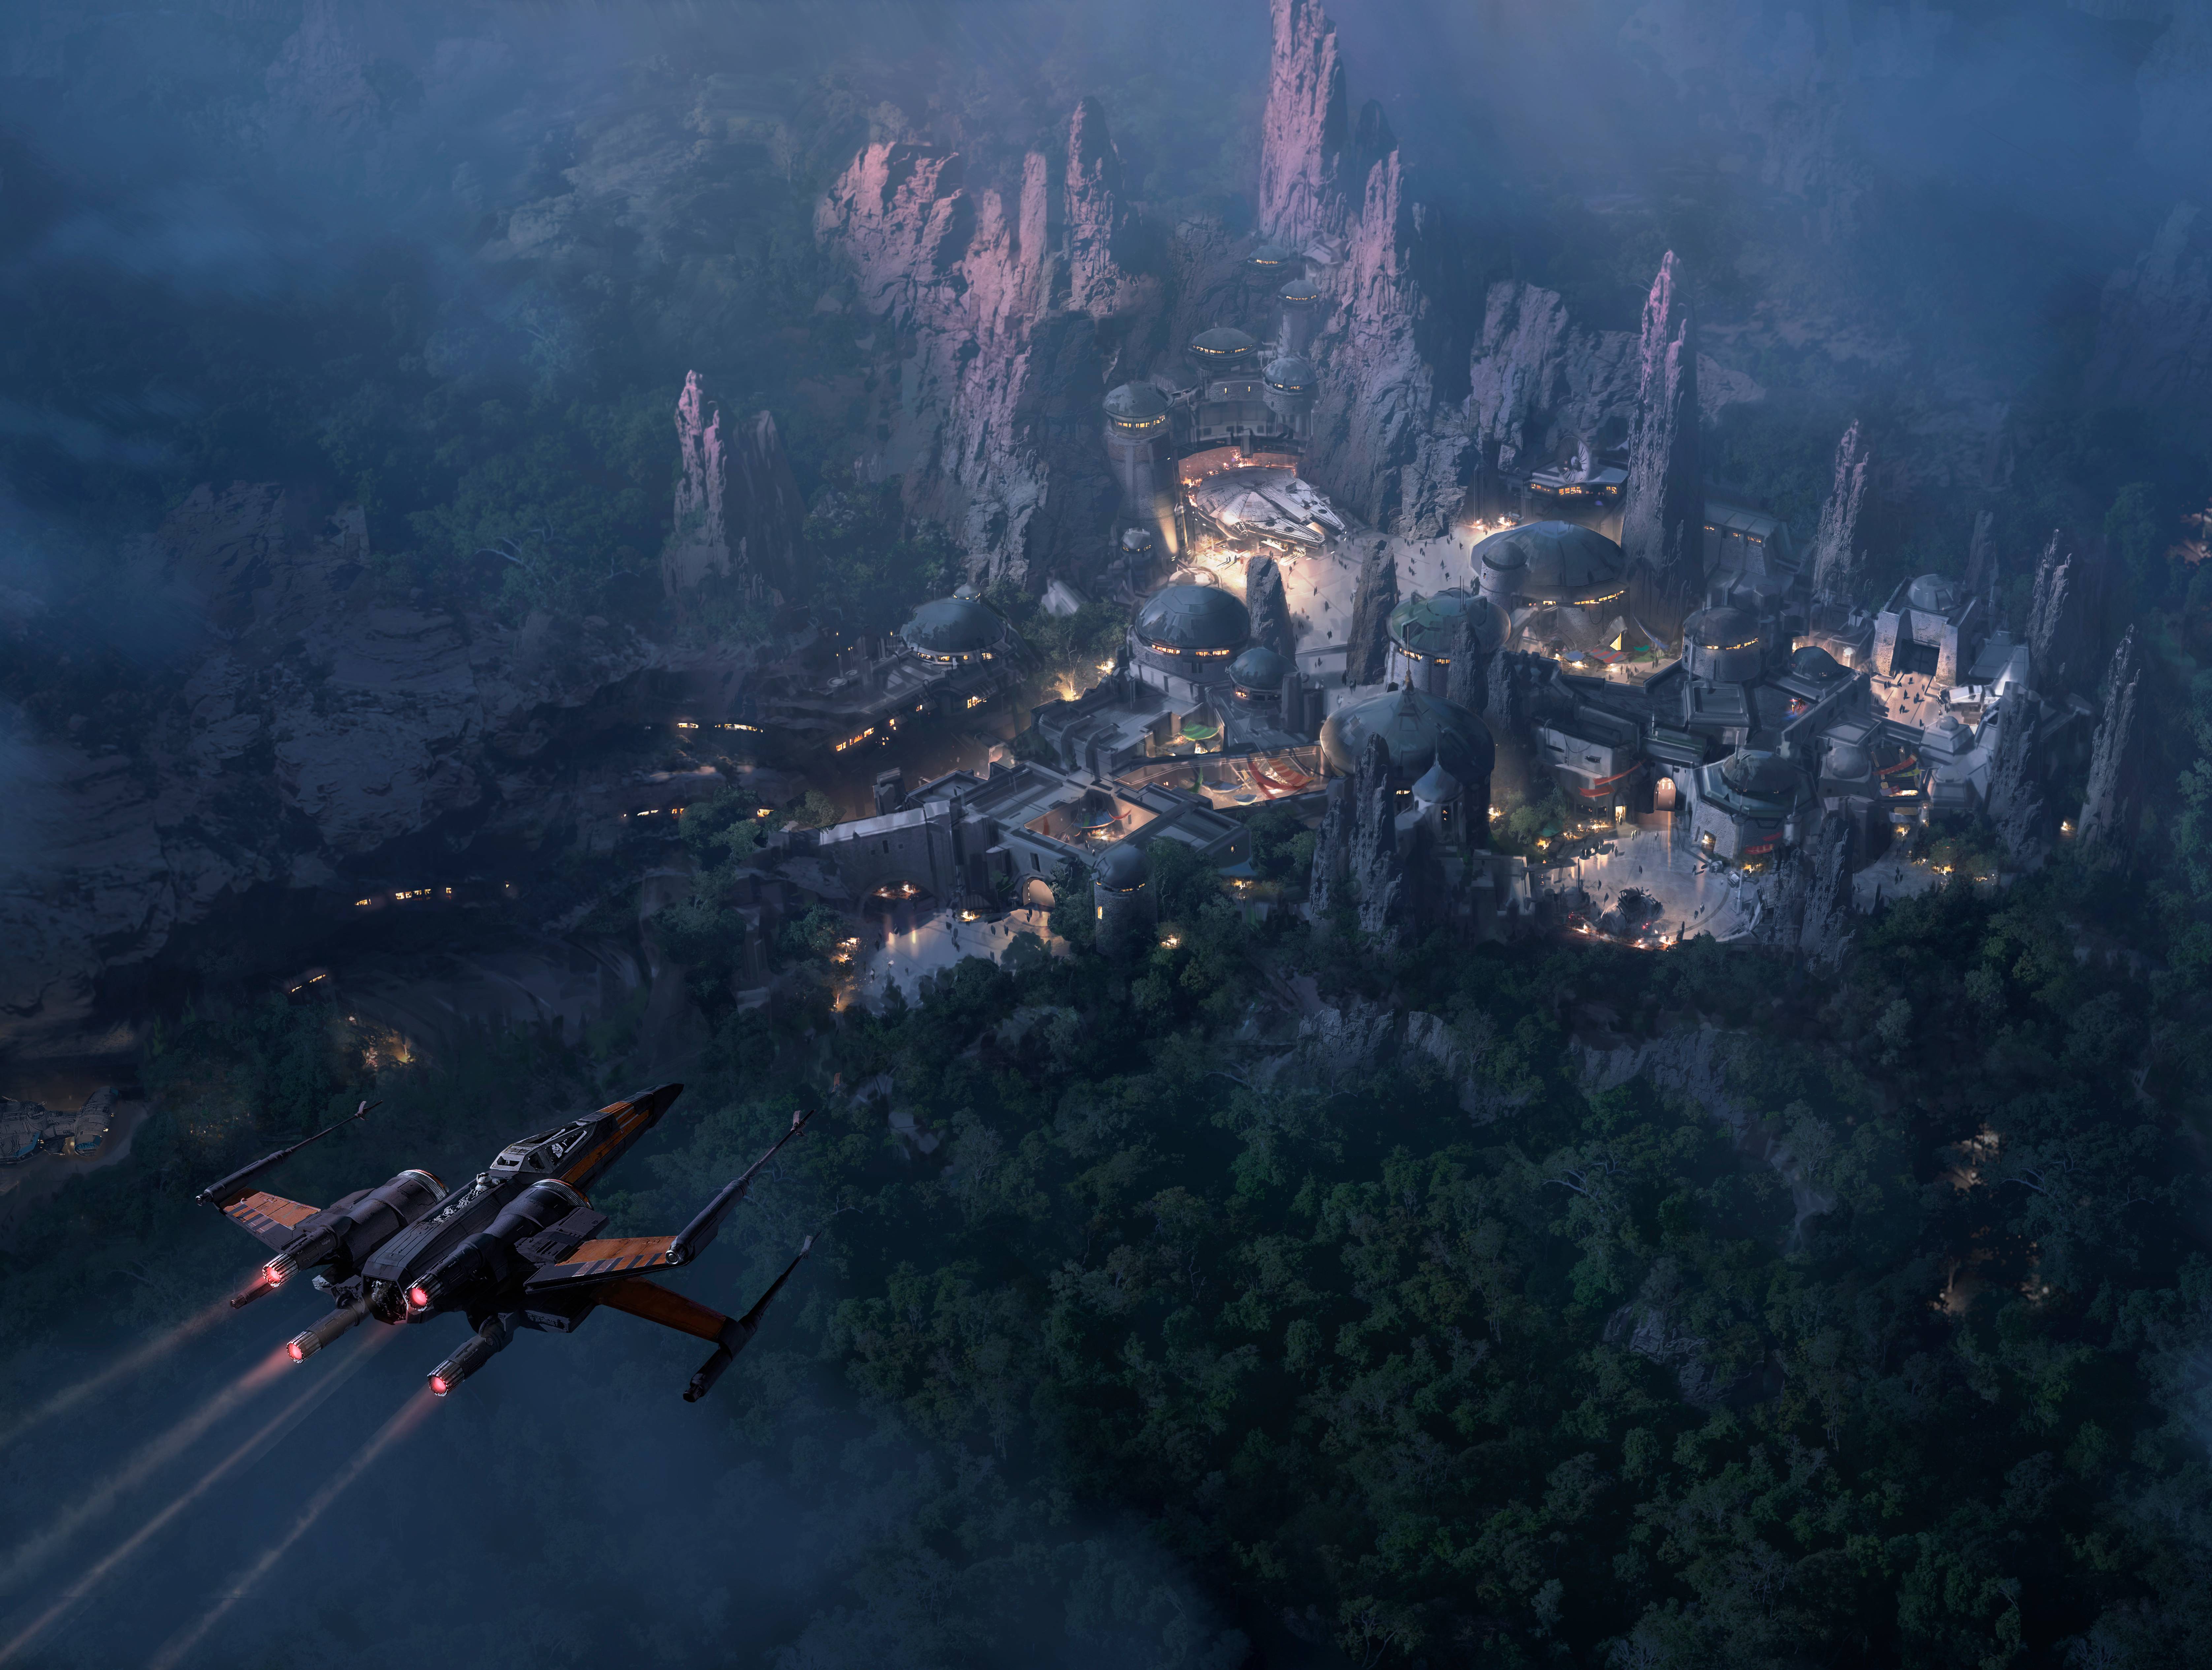 Star Wars Land to open in 2019